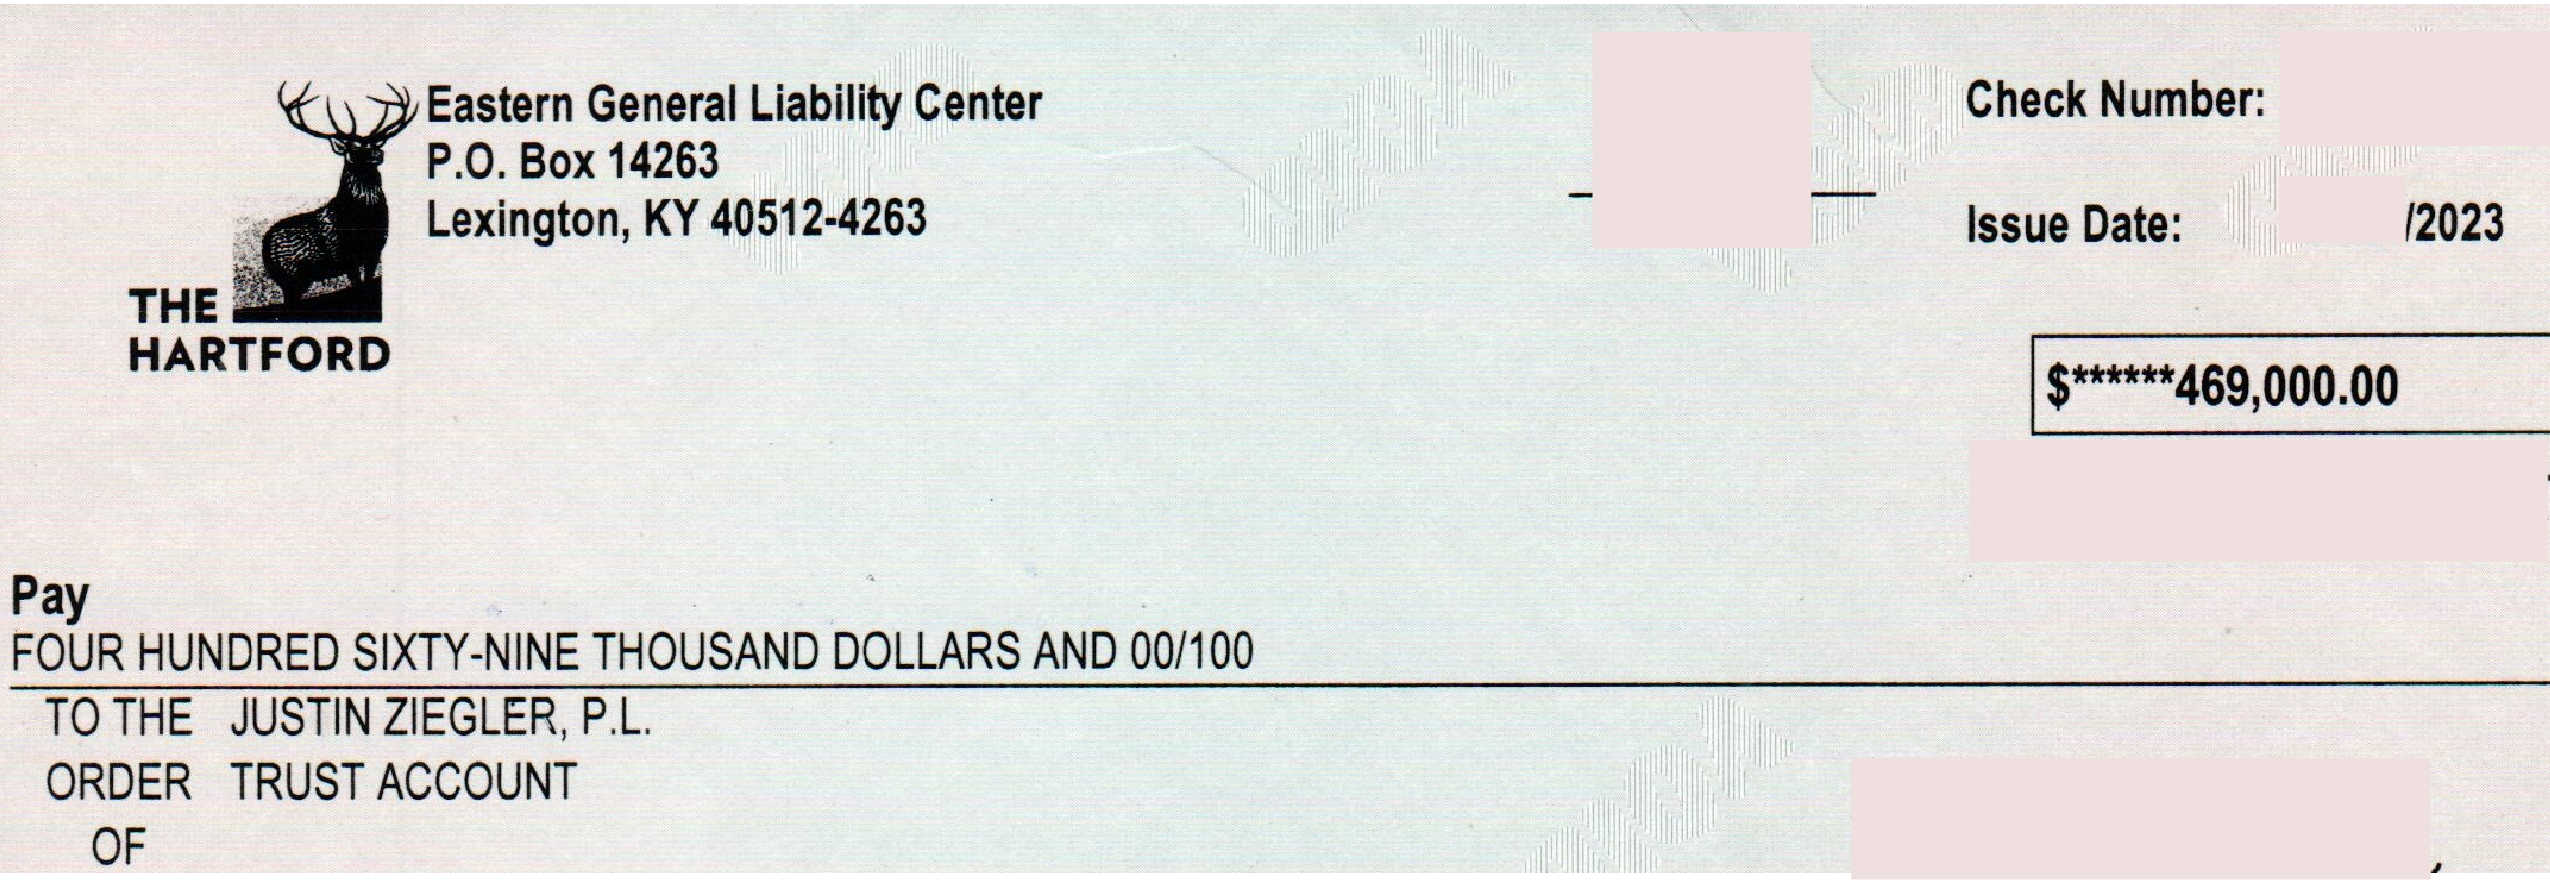 $469,000 settlement check from the Hartford General Liability